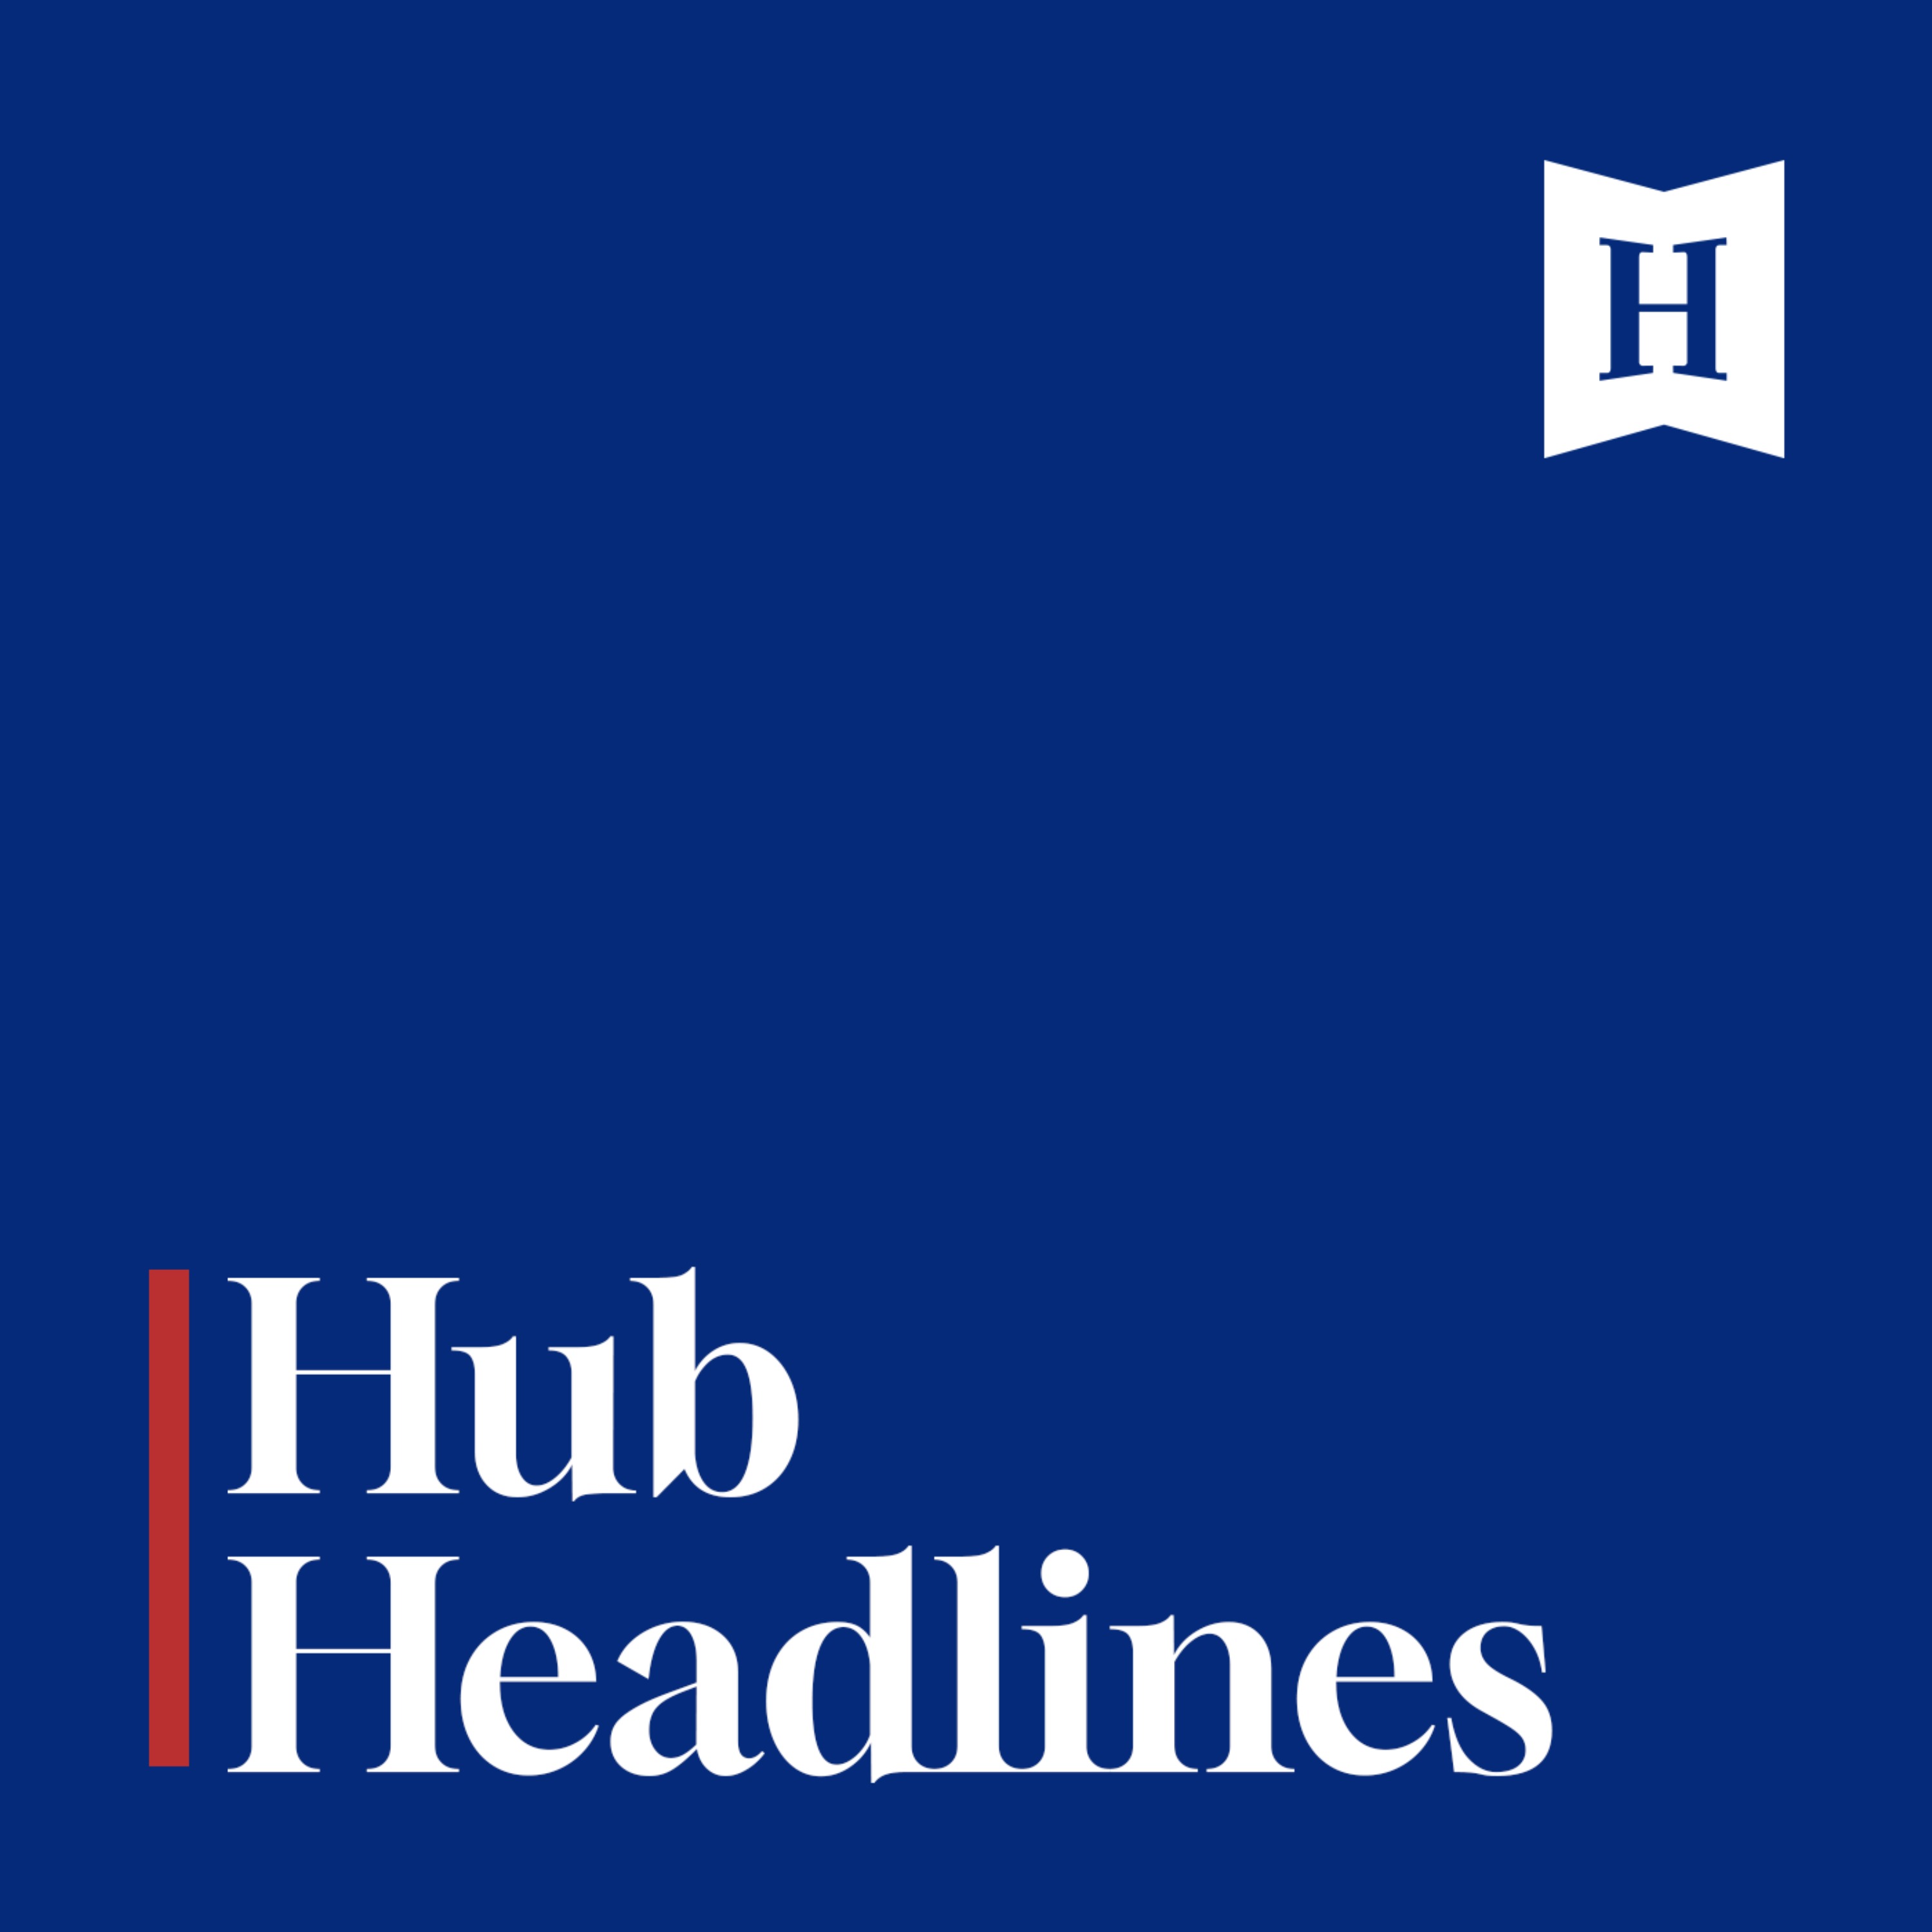 Hub Headlines: The Cass Review shifts the debate on transgender care